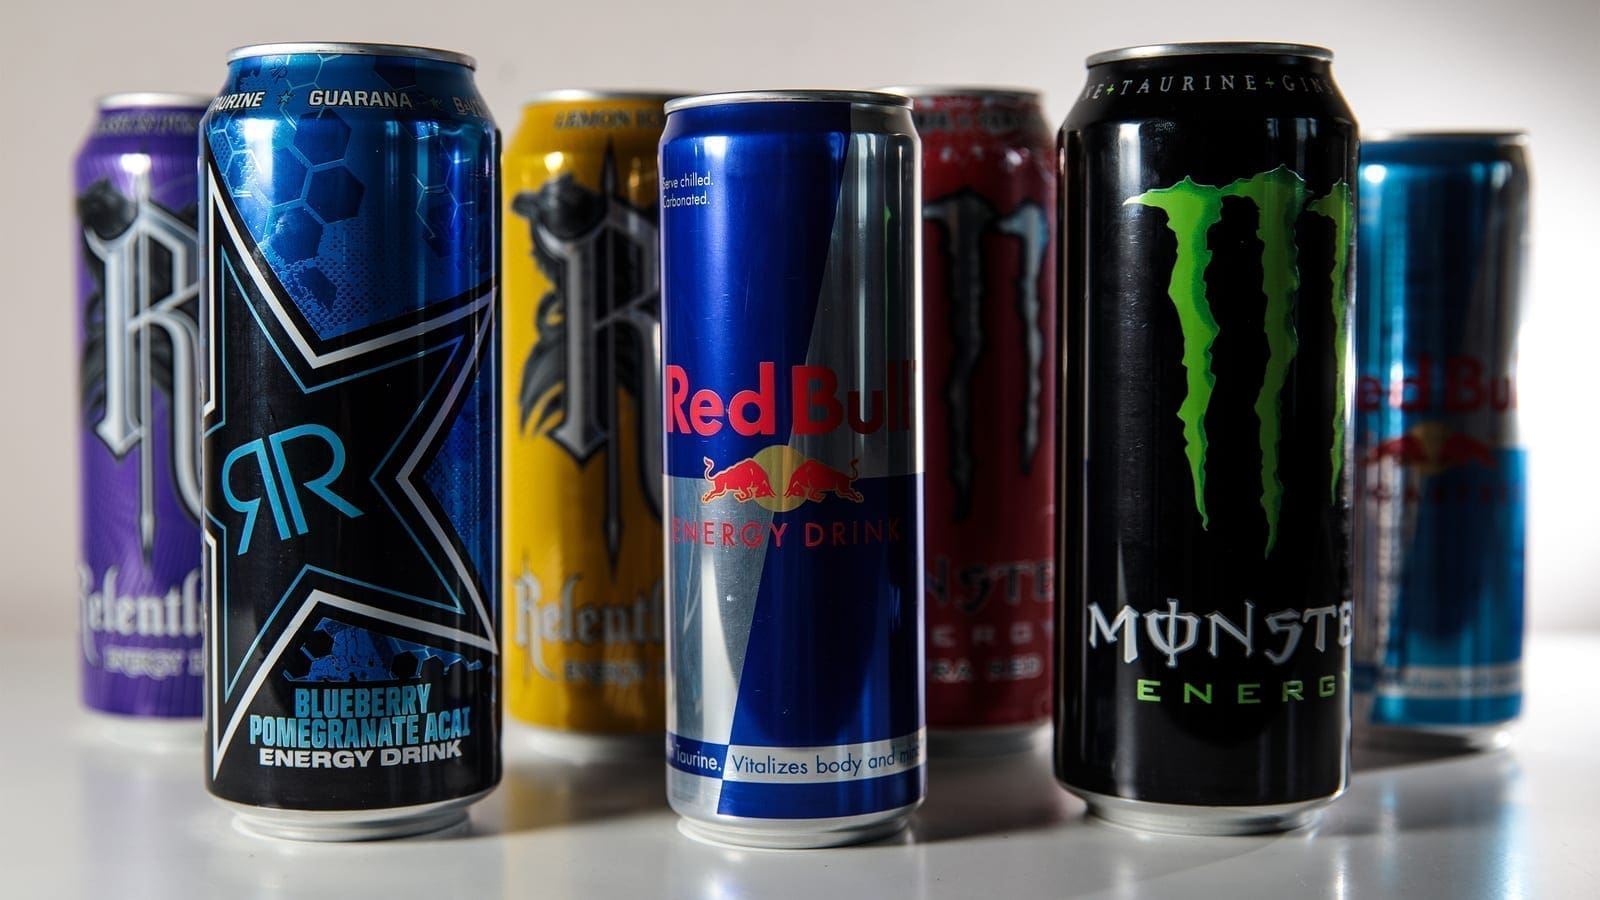 Energy drinks remain popular among physically active adults even as concerns about caffeine content emerge